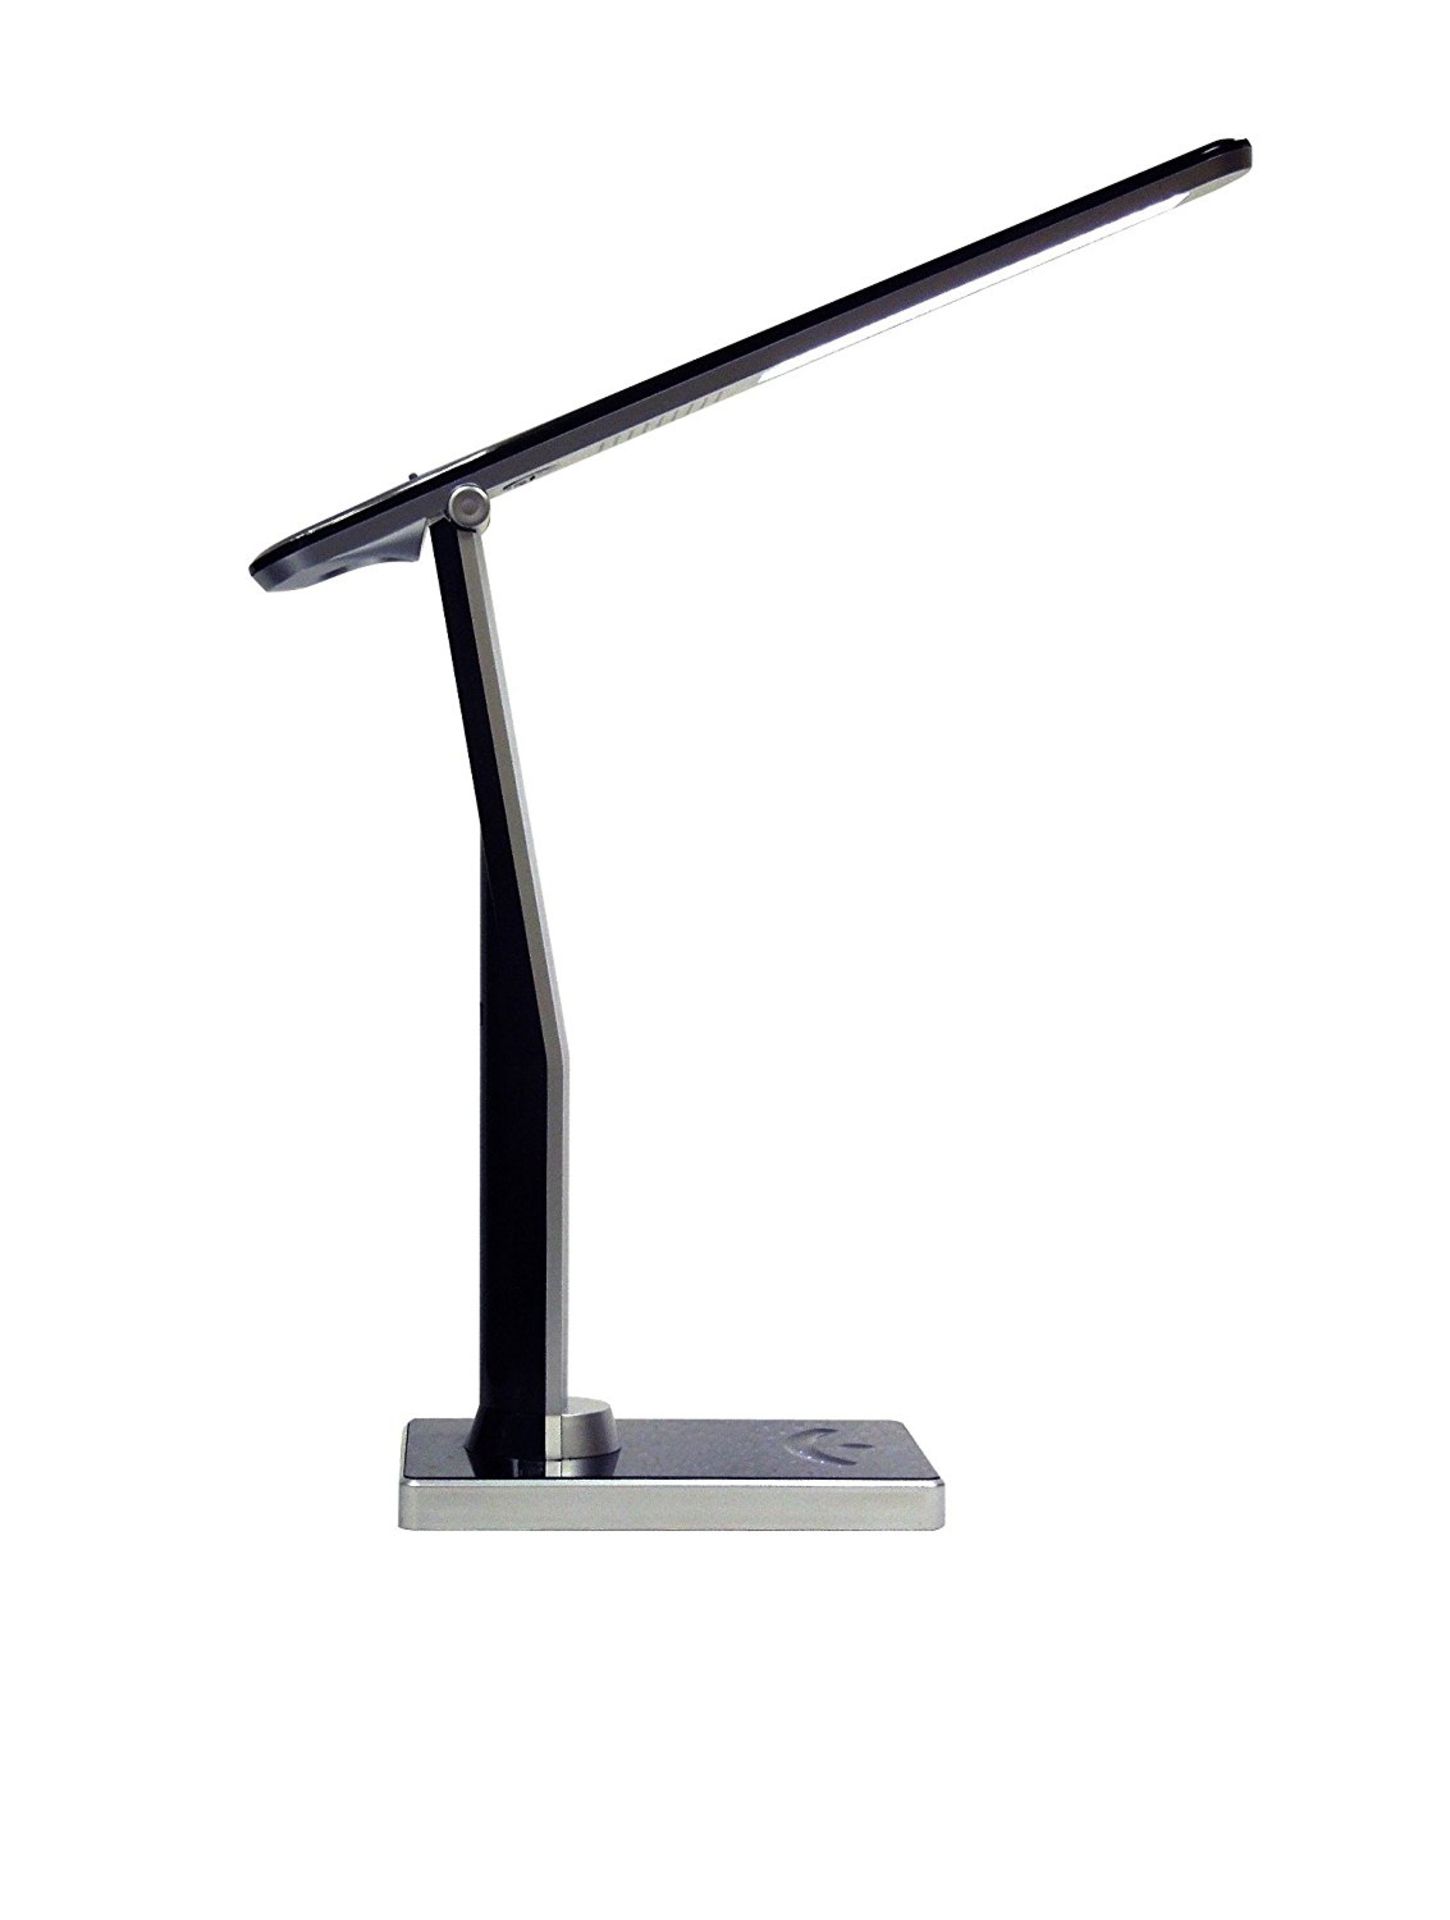 V Brand New Lifemax Pelican LED Light with Clock - One Touch Control For Adjustable Brightness - - Image 2 of 2